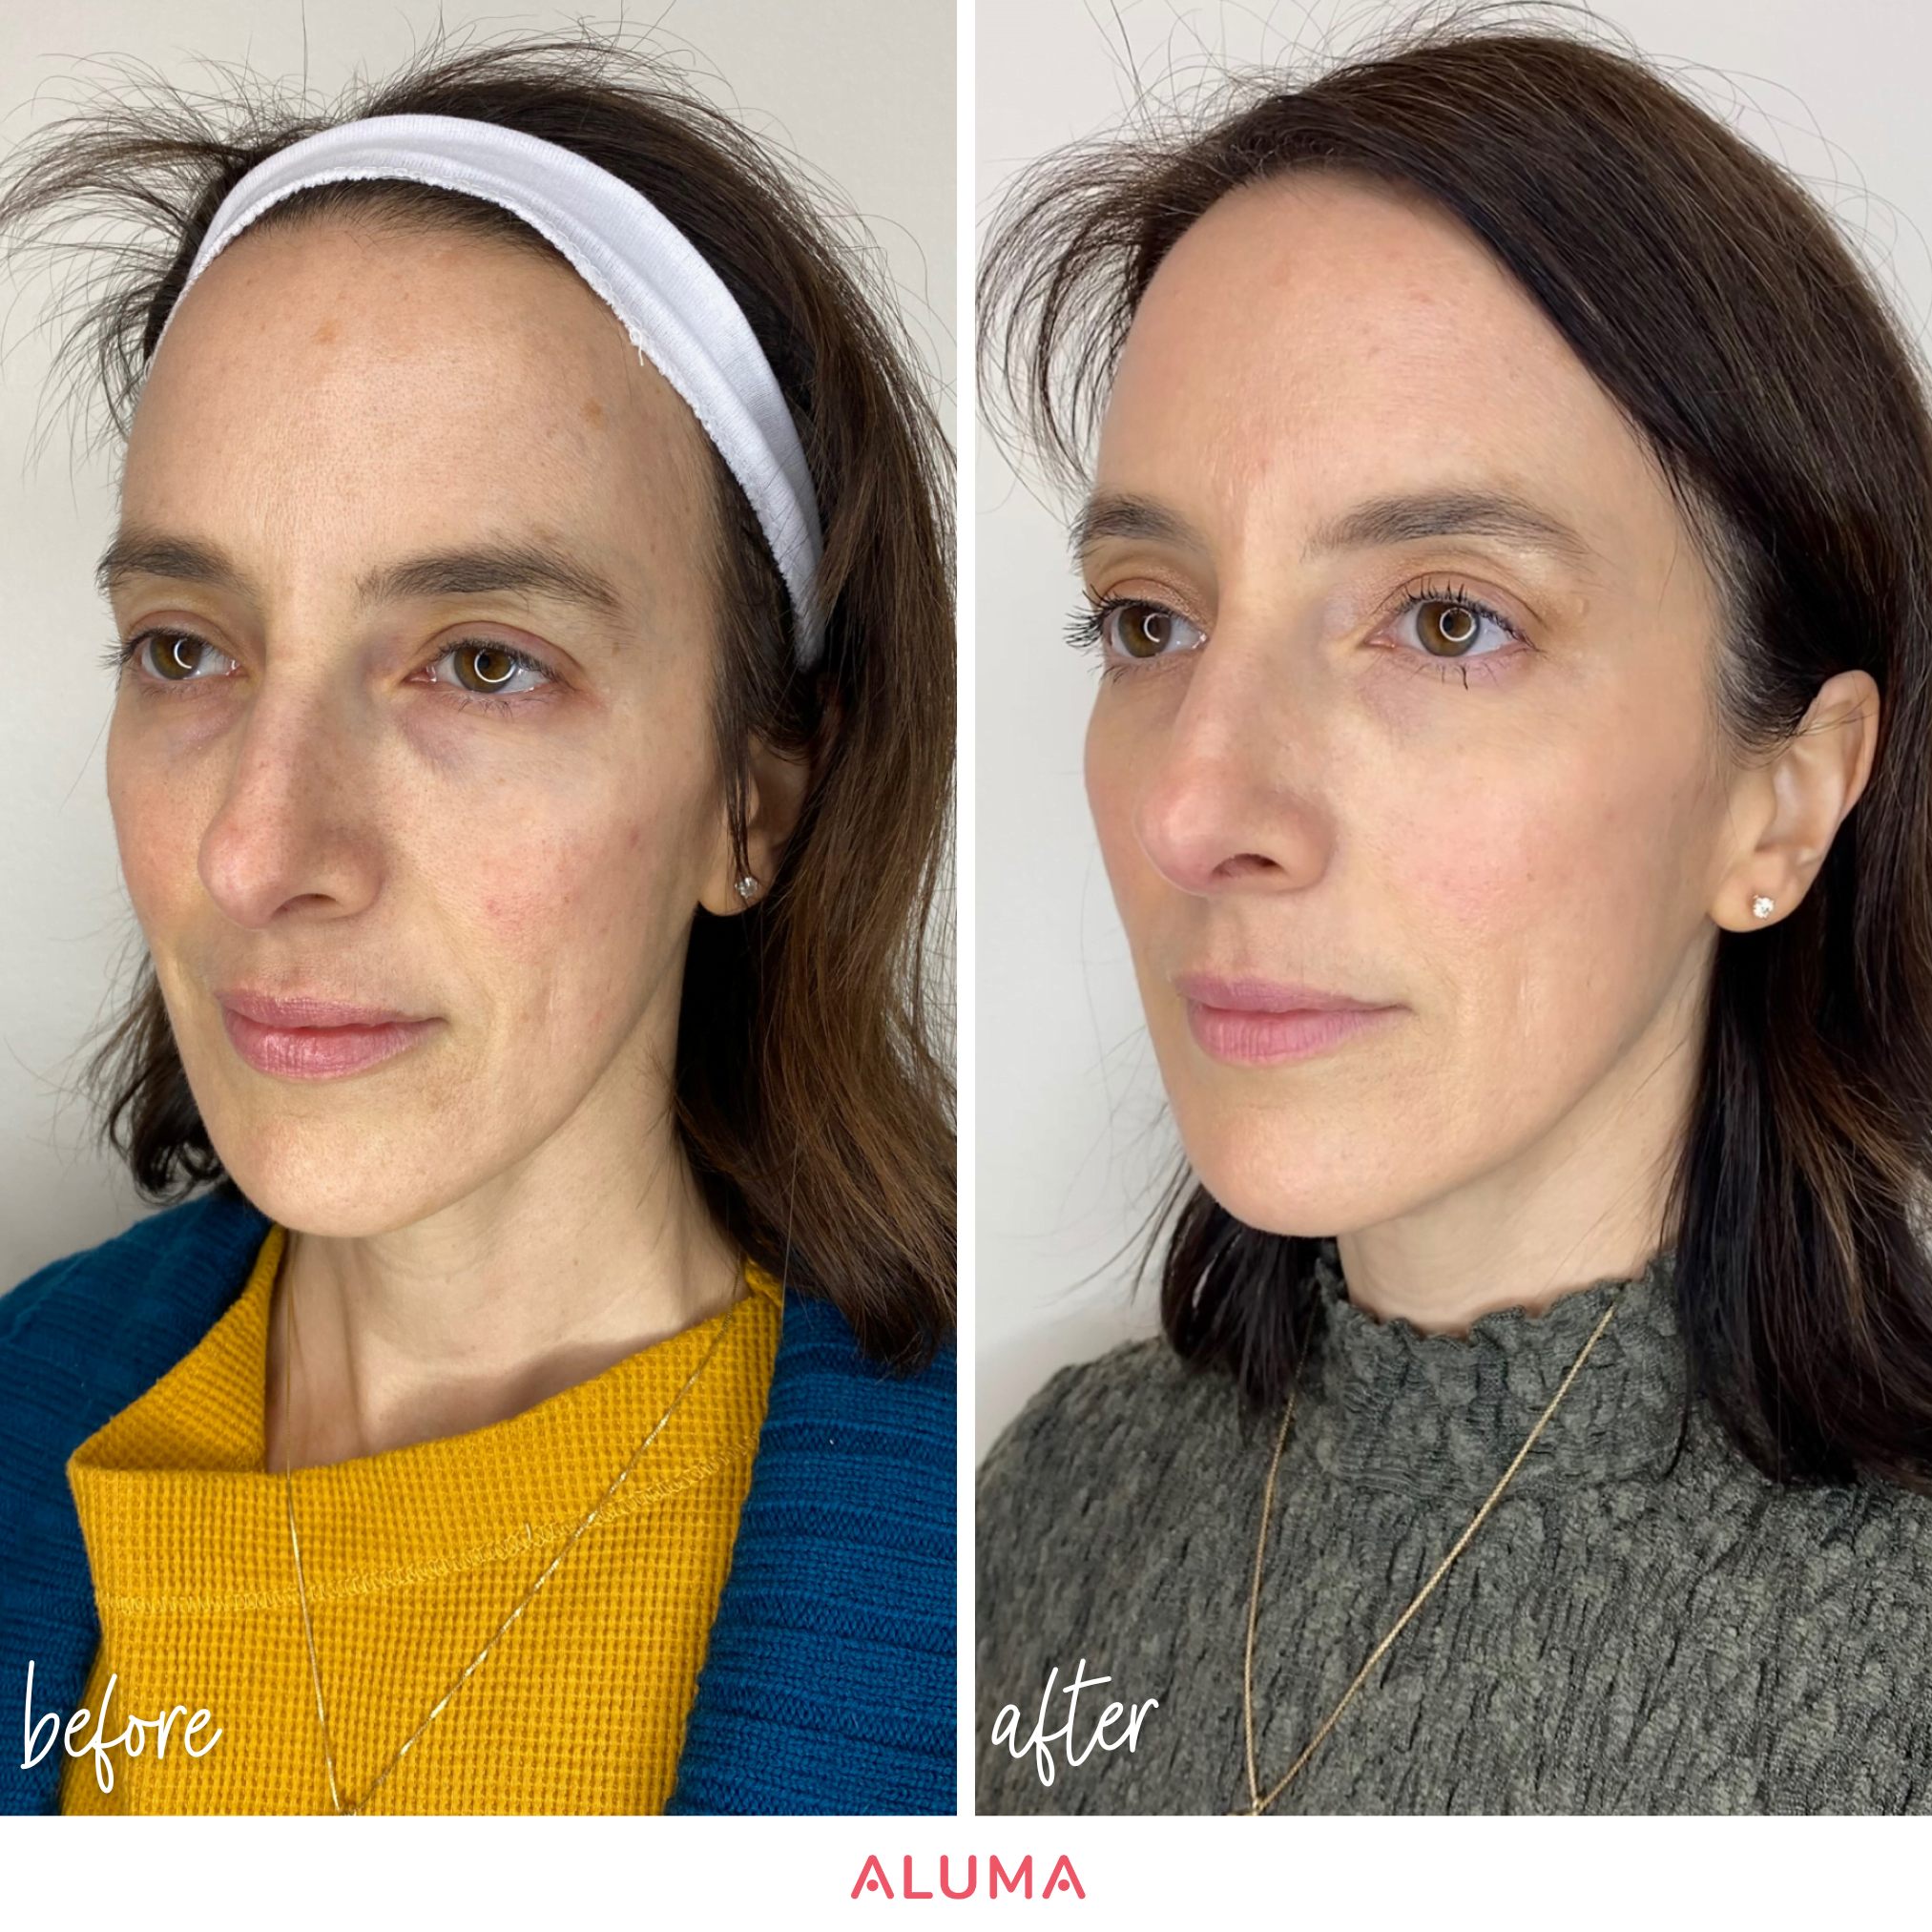 n this photo, you can see the bio-stimulating positive effects, such as volumized skin, tighter jawline, and an overall refreshed appearance of a Sculptra treatment from a woman who was treated at Aluma Aesthetic Medicine in Portland, Oregon. This picture is a before and after photo shot in 3/4's view.